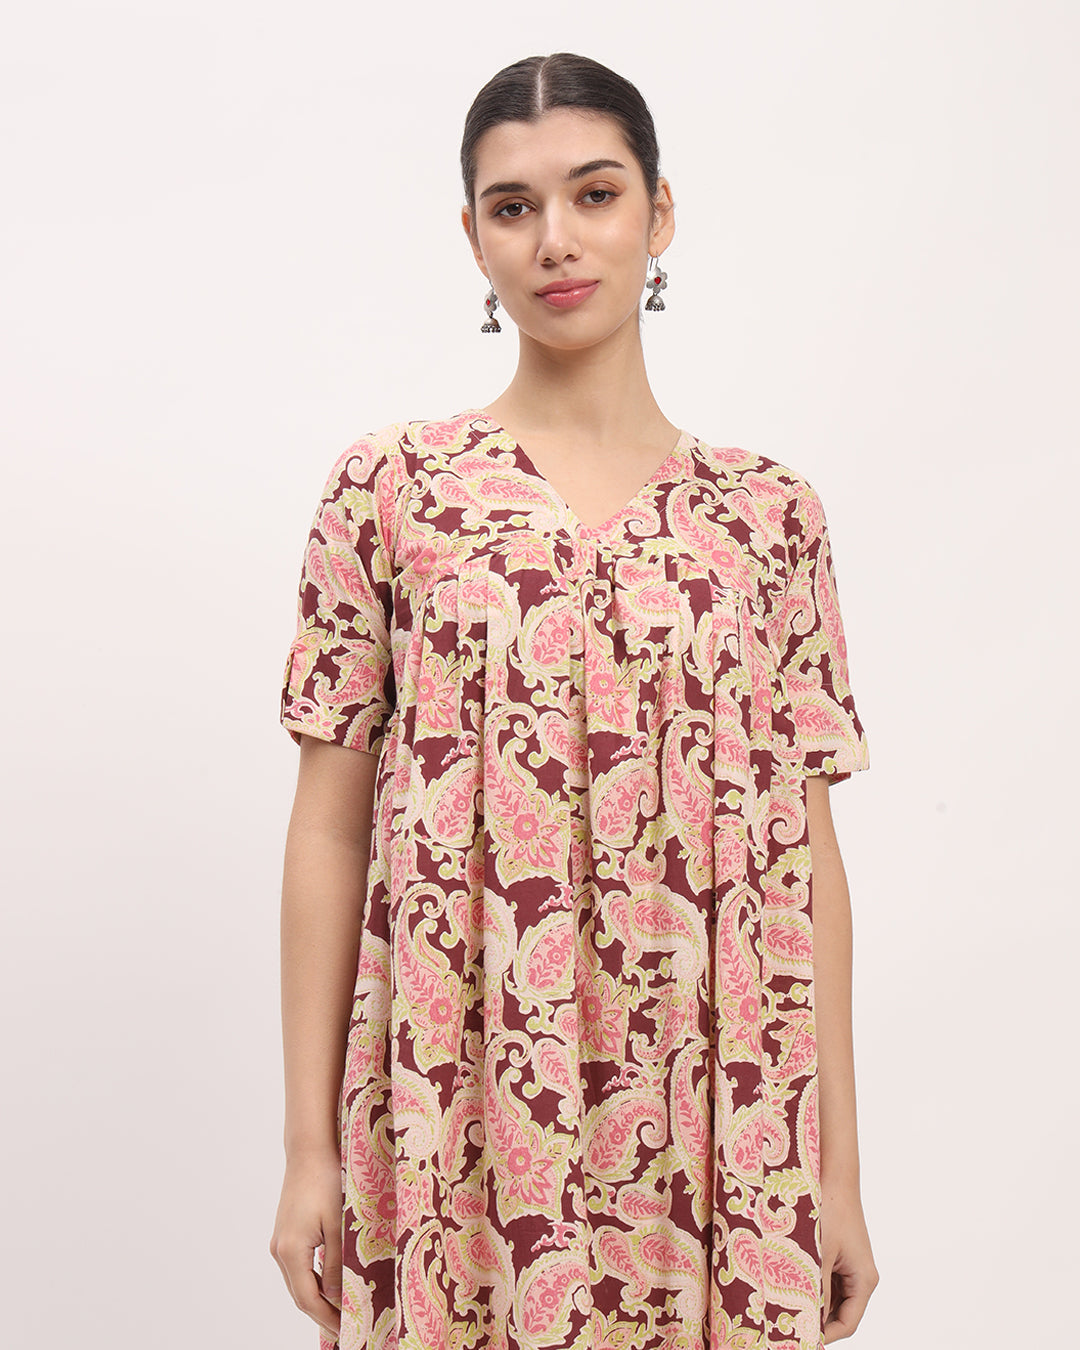 Rosewood Paisely Gathered Printed Kurta (Without Bottoms)